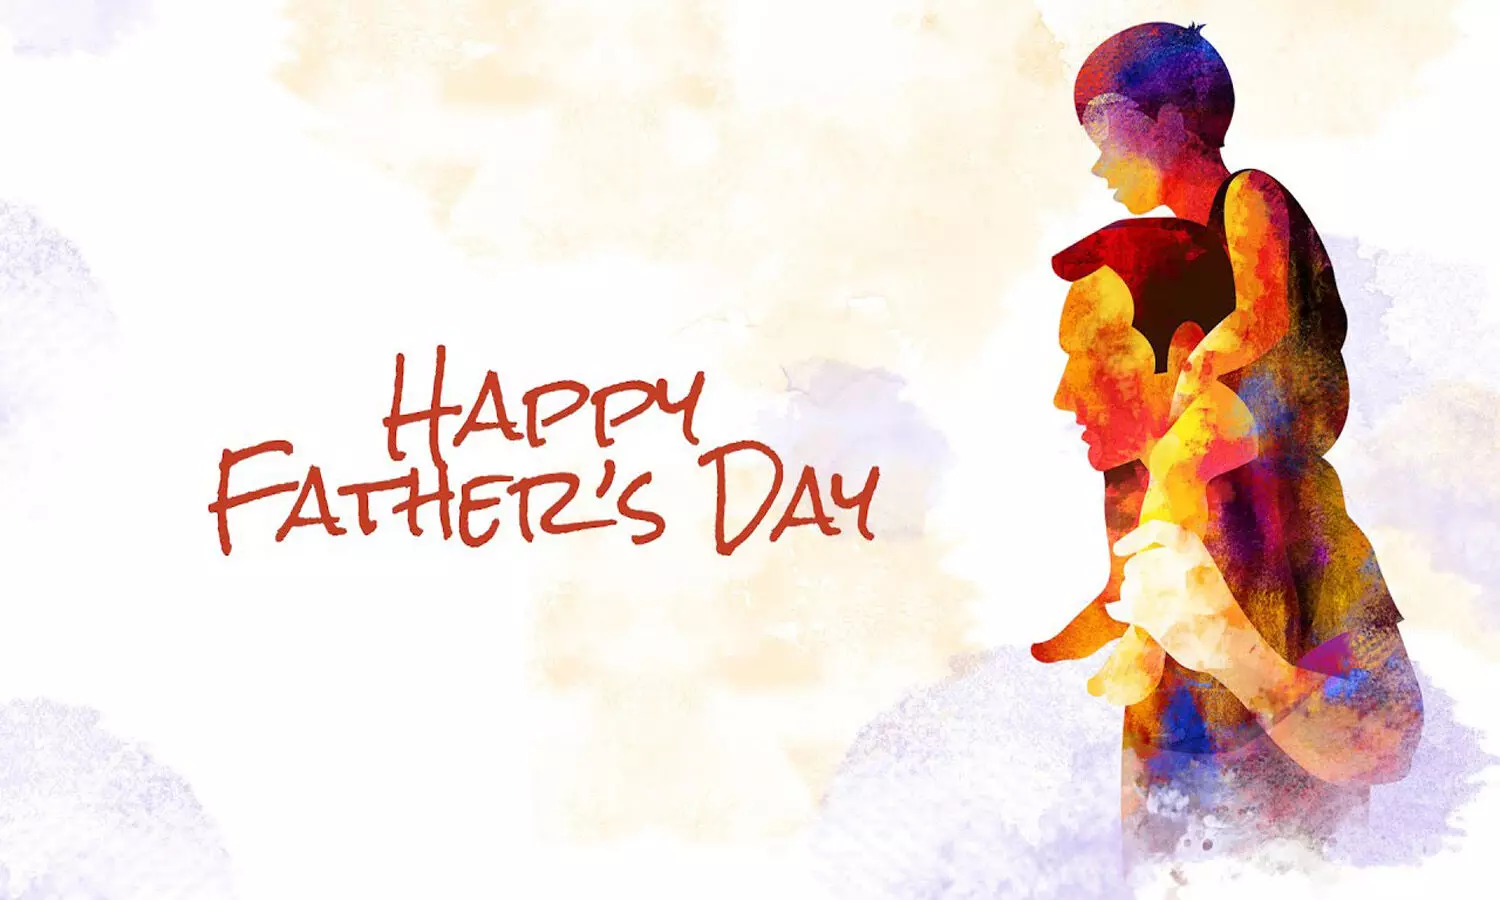 Fathers Day 2021: Watch these Bollywood FILMS with your Dad, Hes gonna love this!